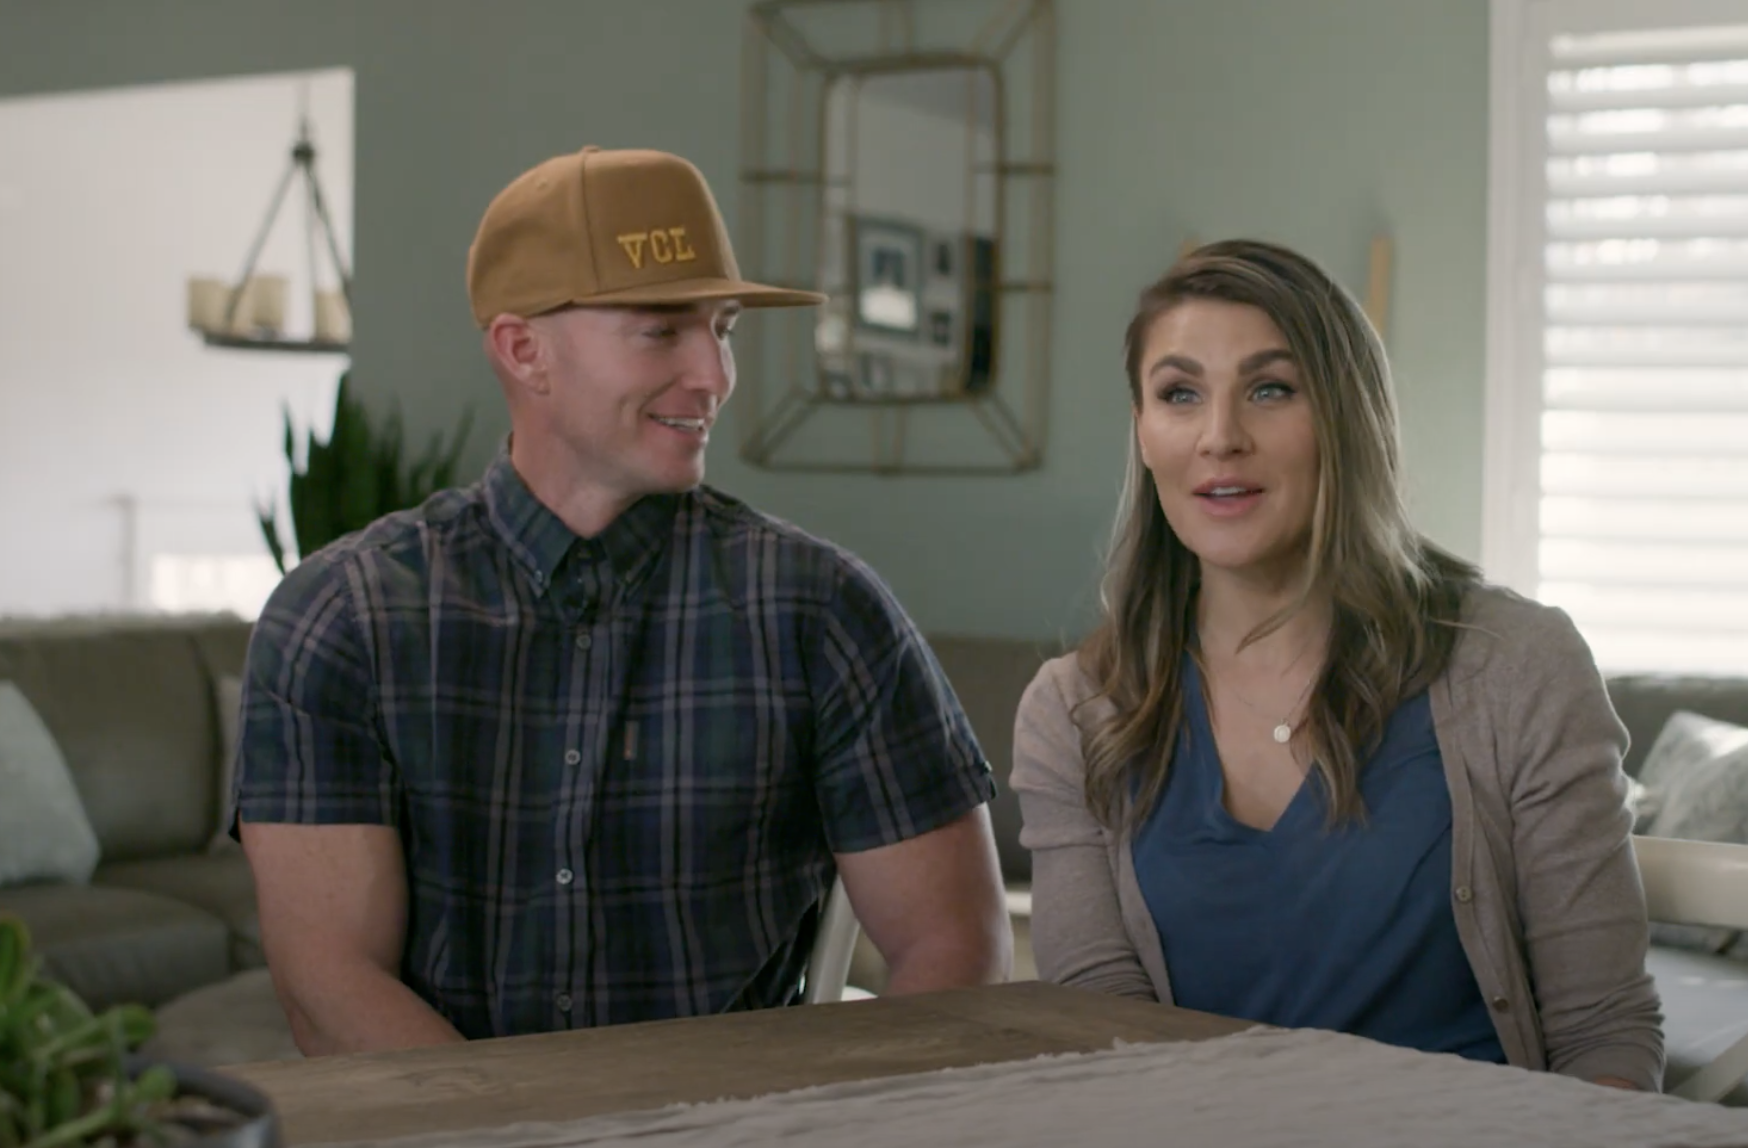 Homeowners Shona and Tod share their story about a break in.